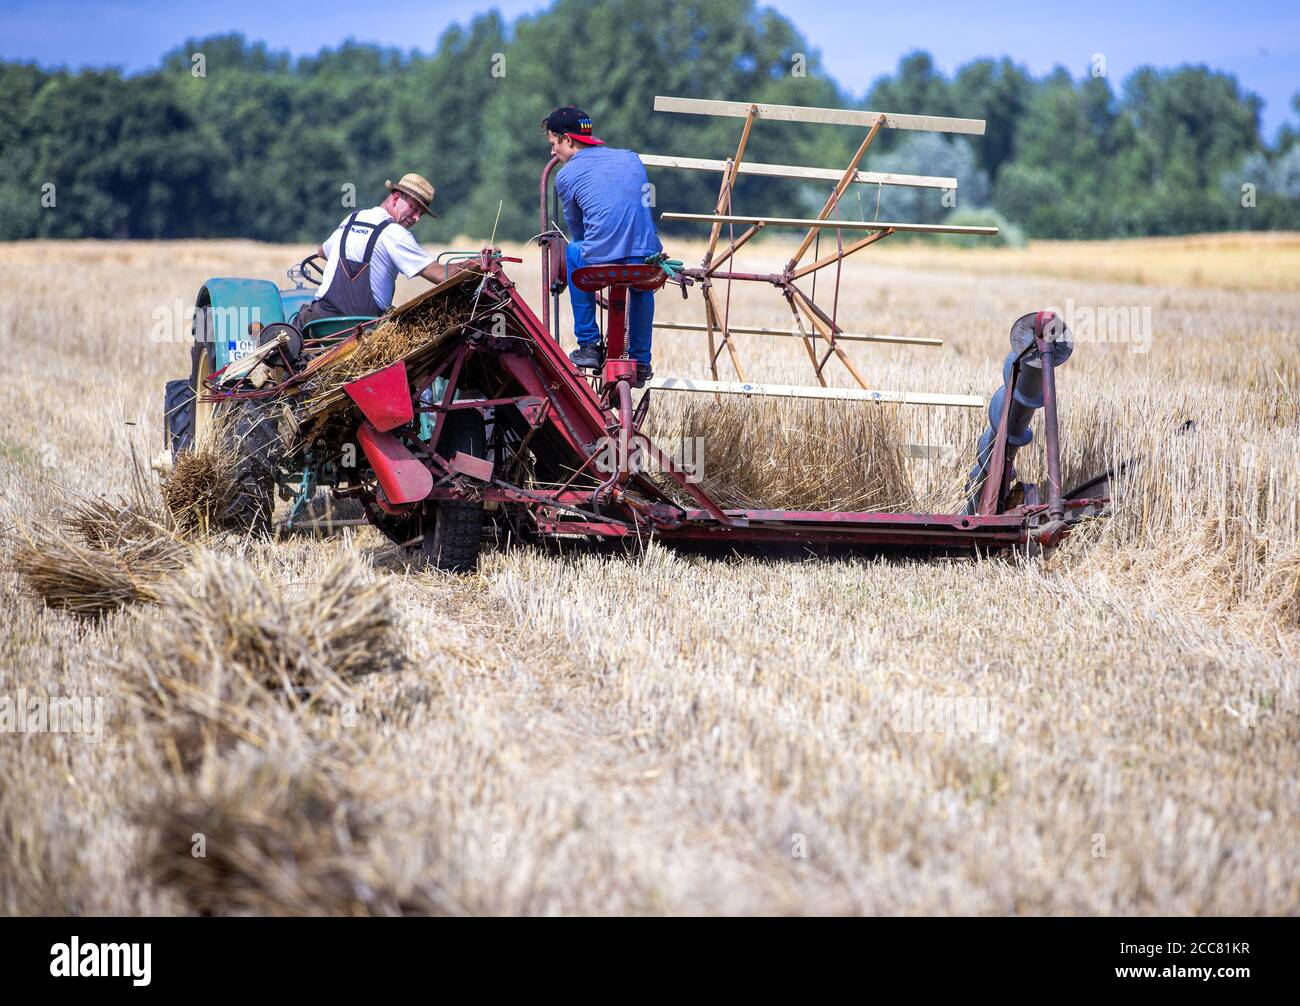 01 August 2020, Schleswig-Holstein, Lübeck: A historic swath mower is used to mow and bind yarrows of straw when harvesting rye straw for the production of drinking straws in the field near Lübeck. From July 2021 at the latest, plastic drinking straws may no longer be sold throughout the EU. As an alternative to the colourful drinking straws made of plastic, special rye is harvested on an area of two hectares near Lübeck and drinking straws are made from it. For many years Strohmi GmbH has been supplying these sustainable straws to hotels, upscale bars and restaurants as well as private indivi Stock Photo